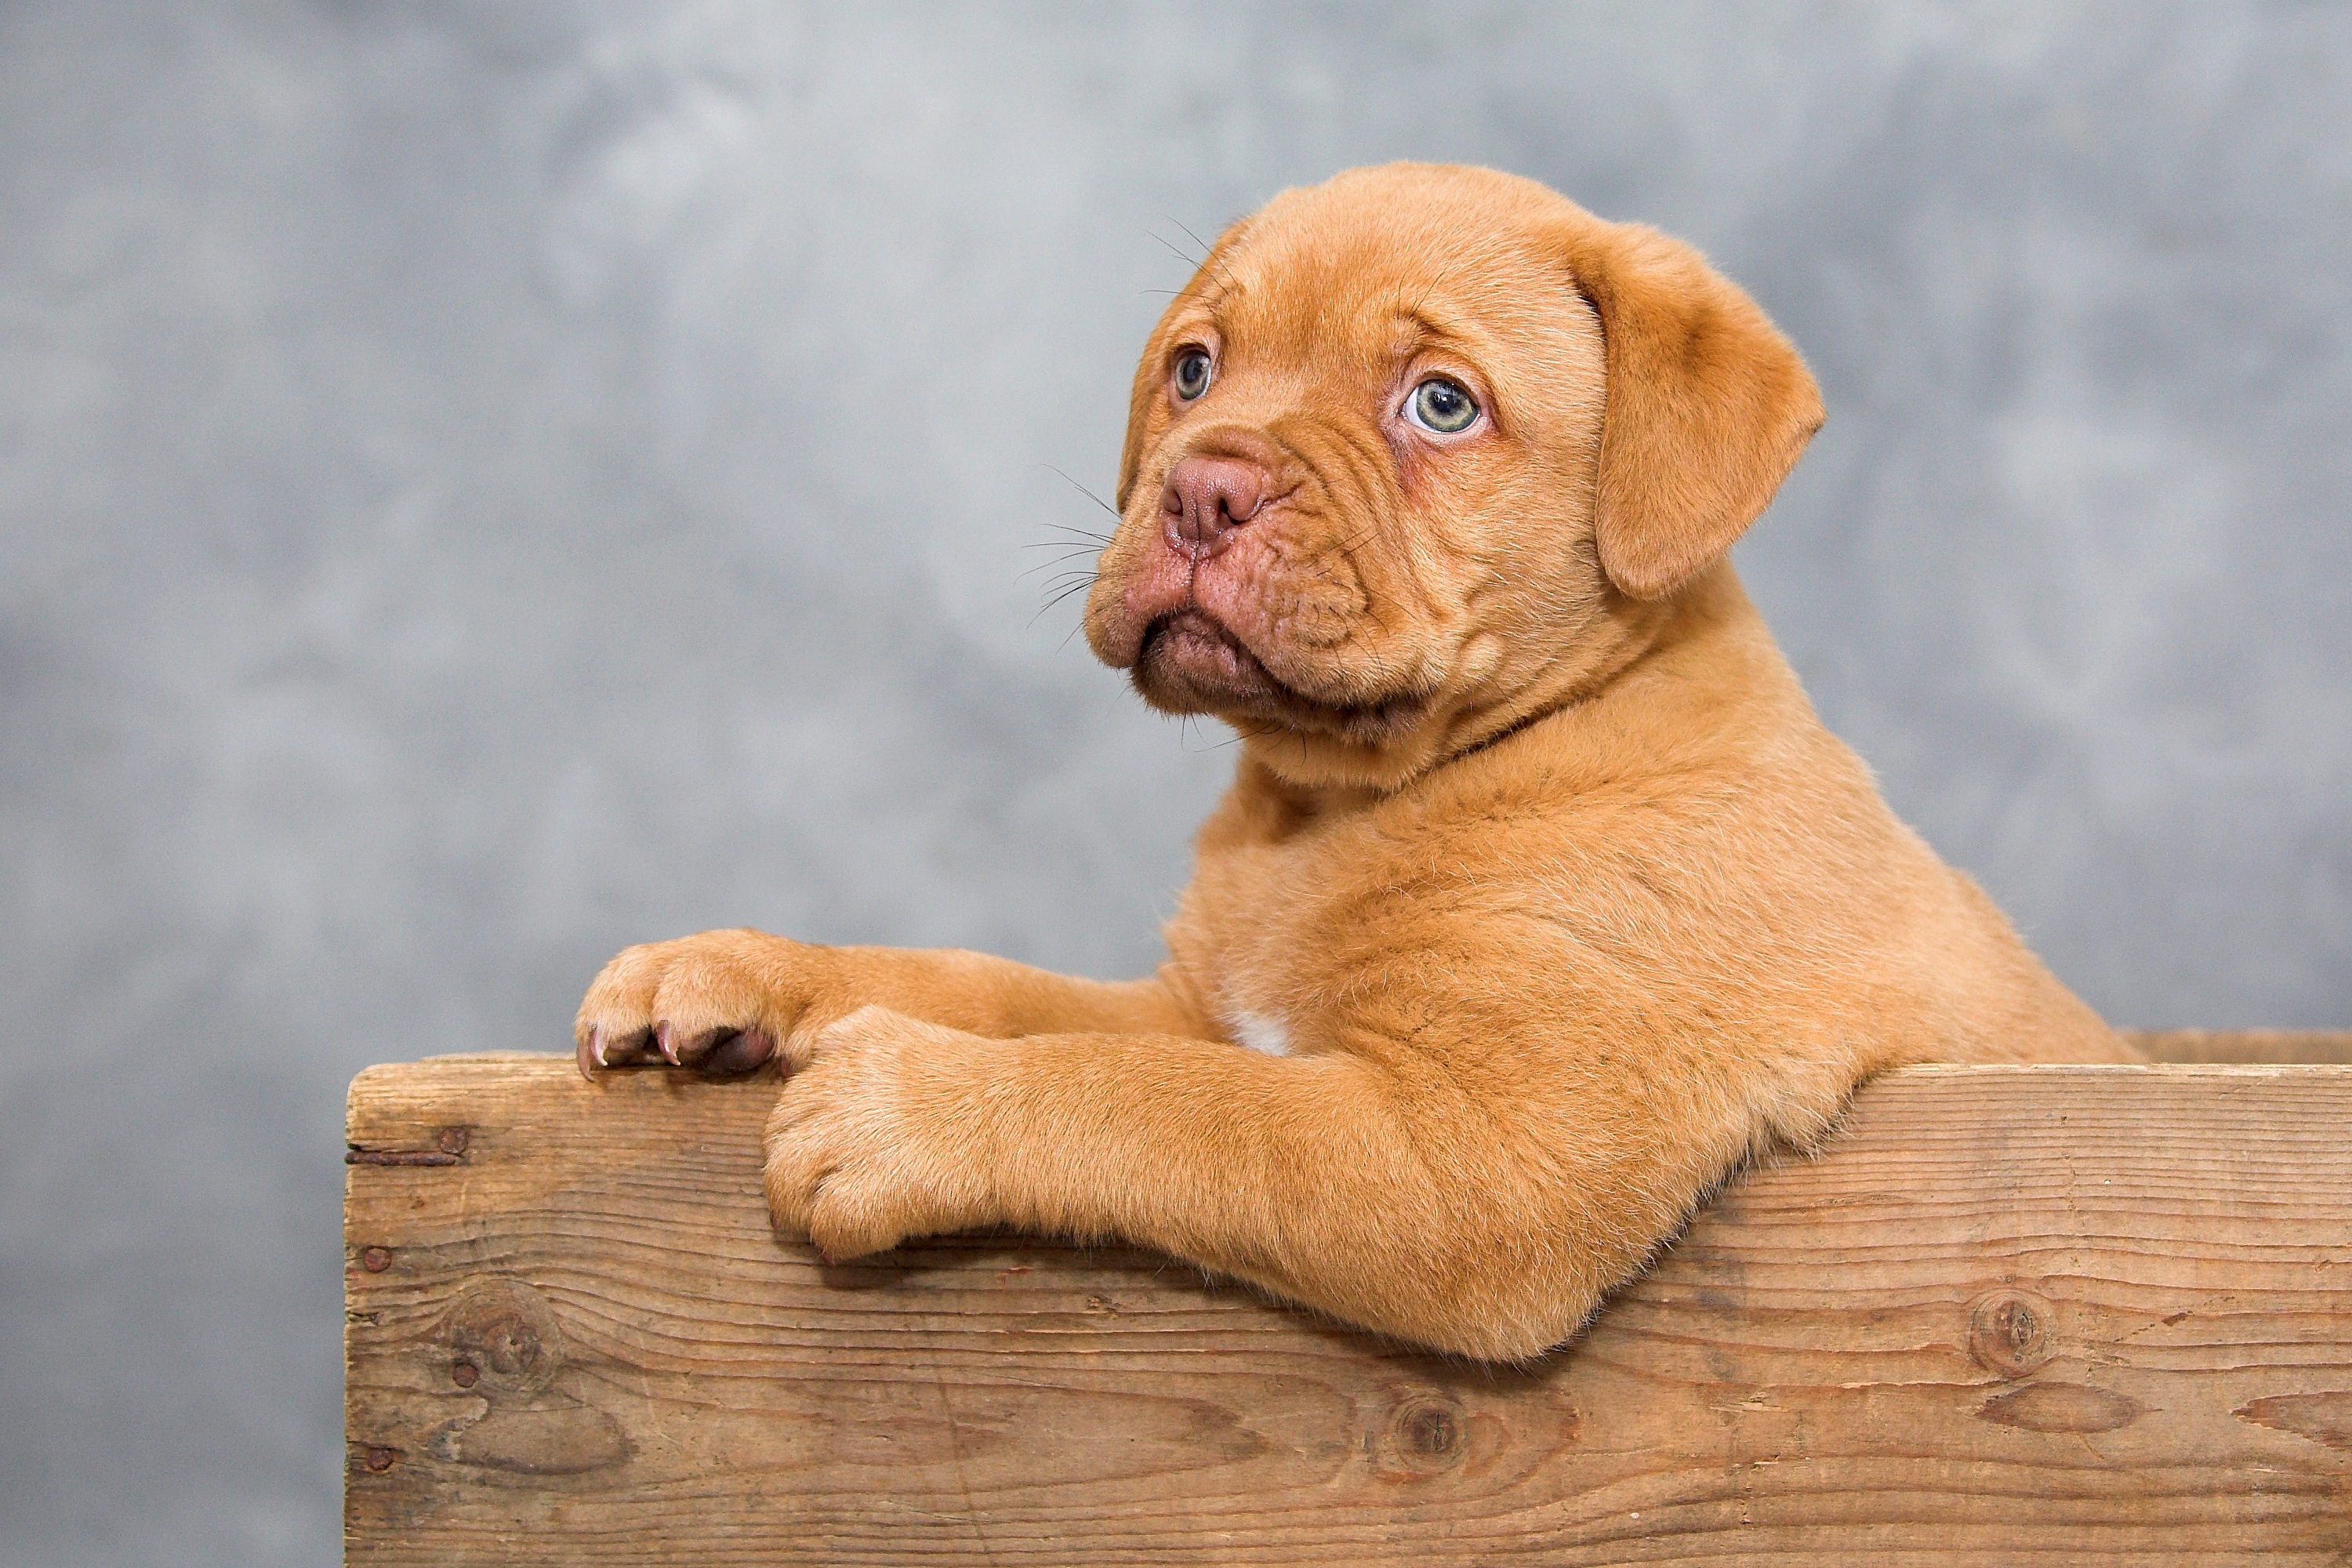 animal, dogue de bordeaux, baby animal, dog, mastiff, portrait, puppy, dogs for android